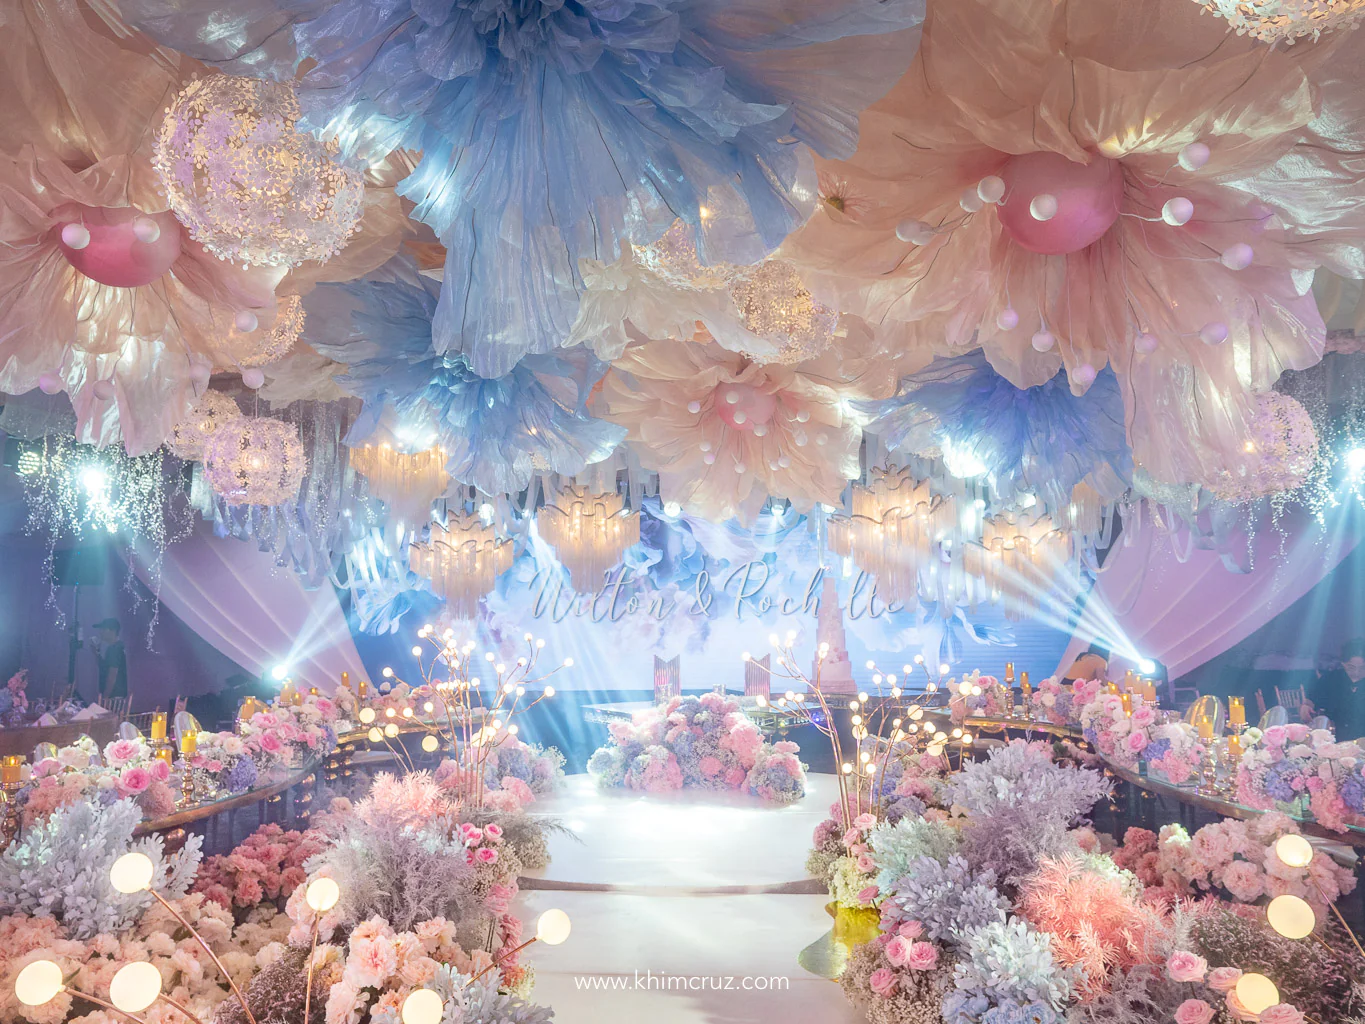 dreamy floral escape wedding with oversized hanging floral designs by Khim Cruz